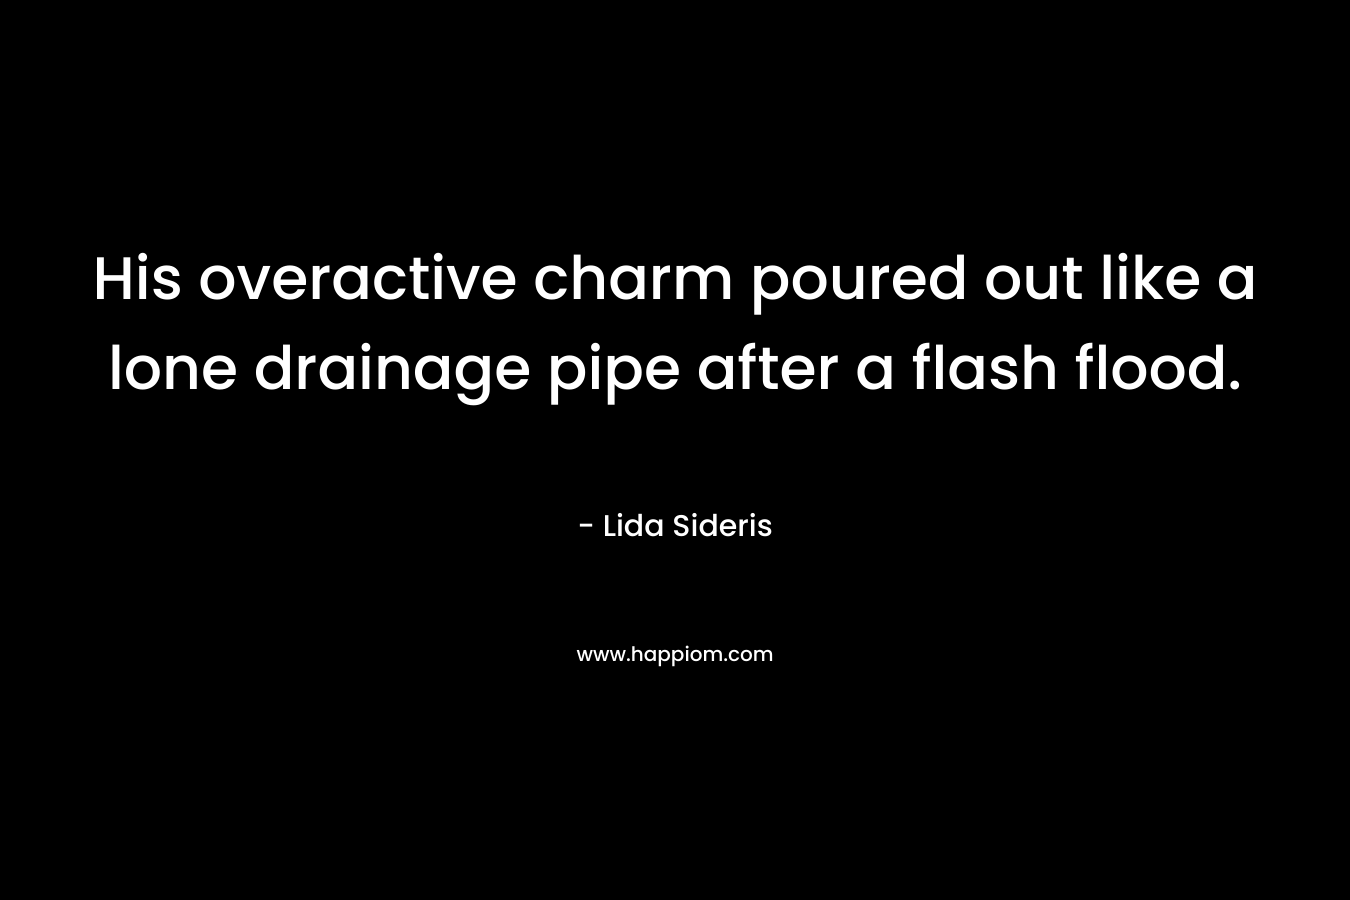 His overactive charm poured out like a lone drainage pipe after a flash flood. – Lida Sideris